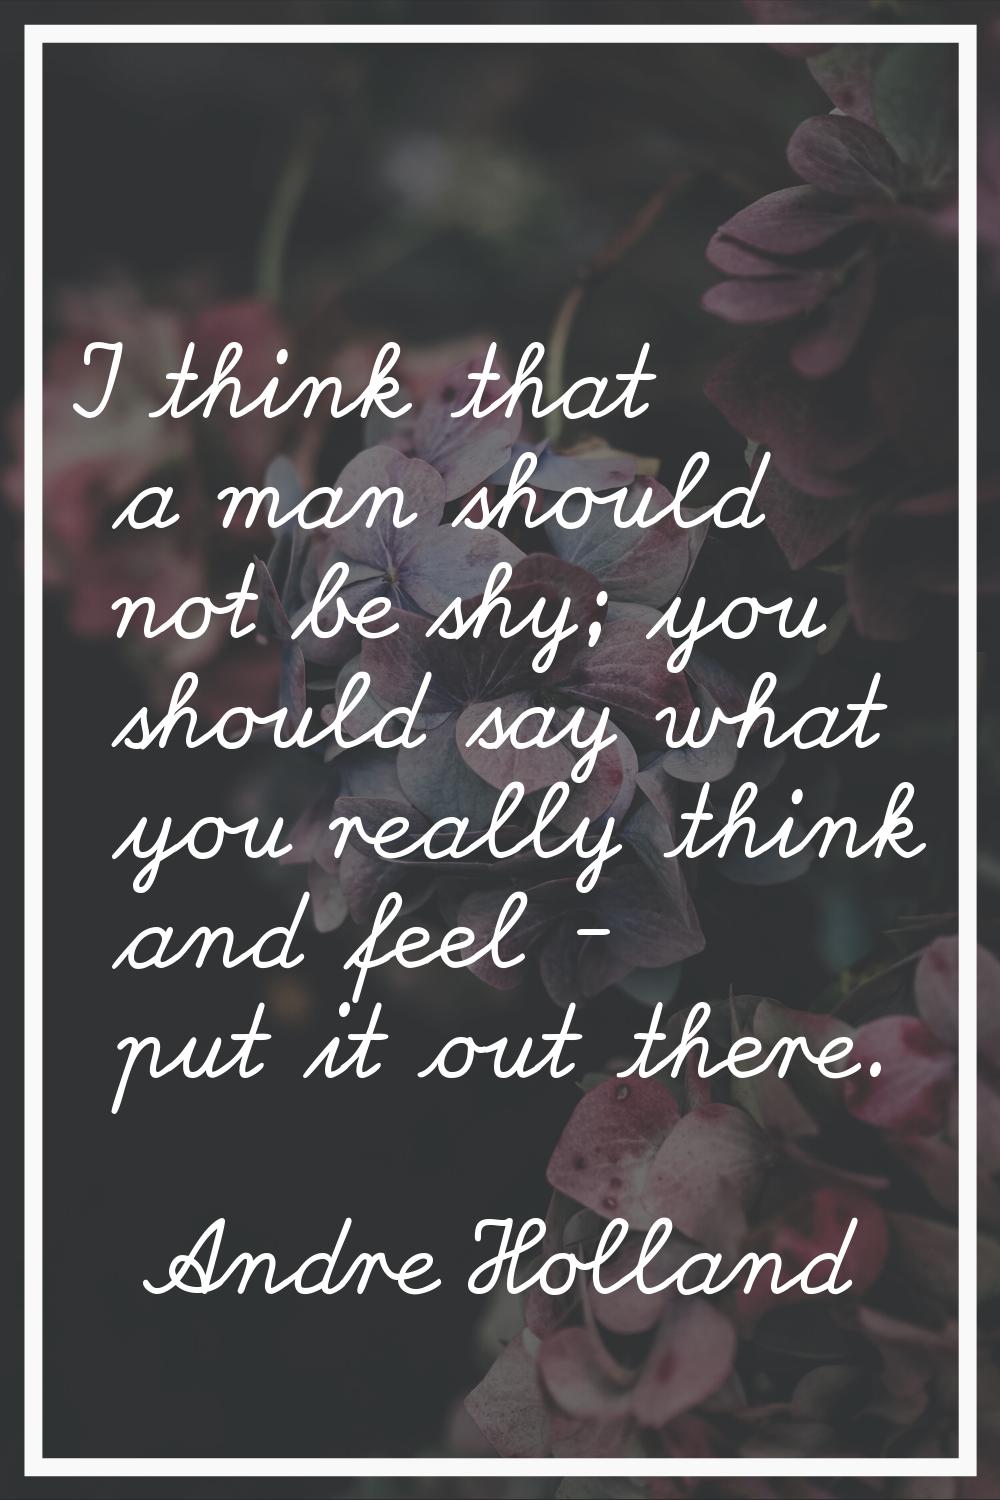 I think that a man should not be shy; you should say what you really think and feel - put it out th